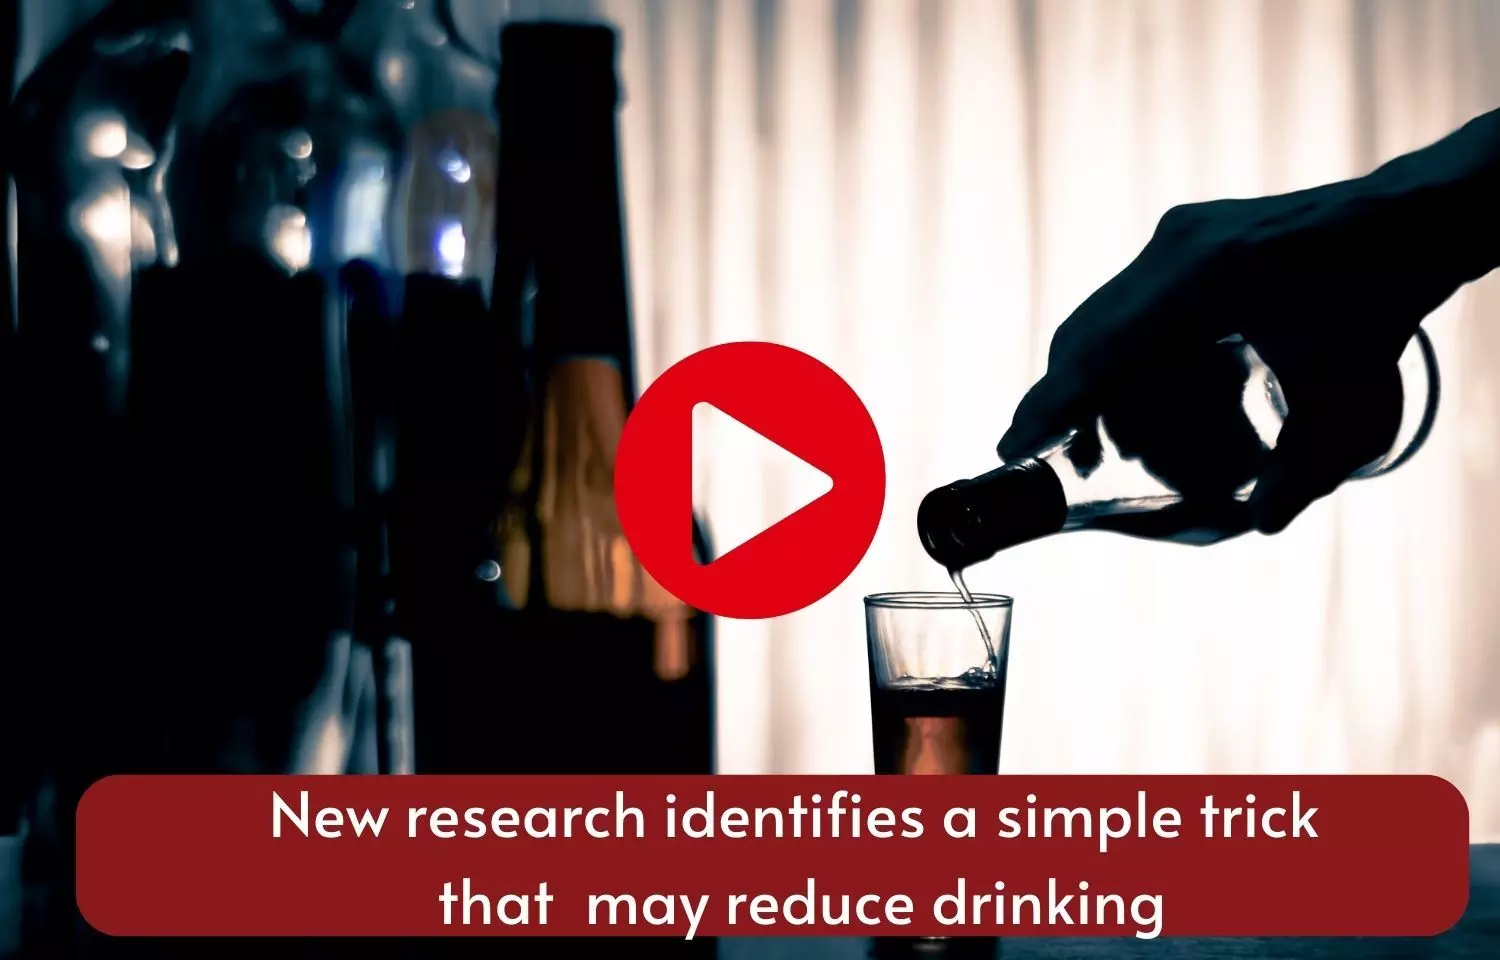 New research identifies a simple trick that may reduce drinking